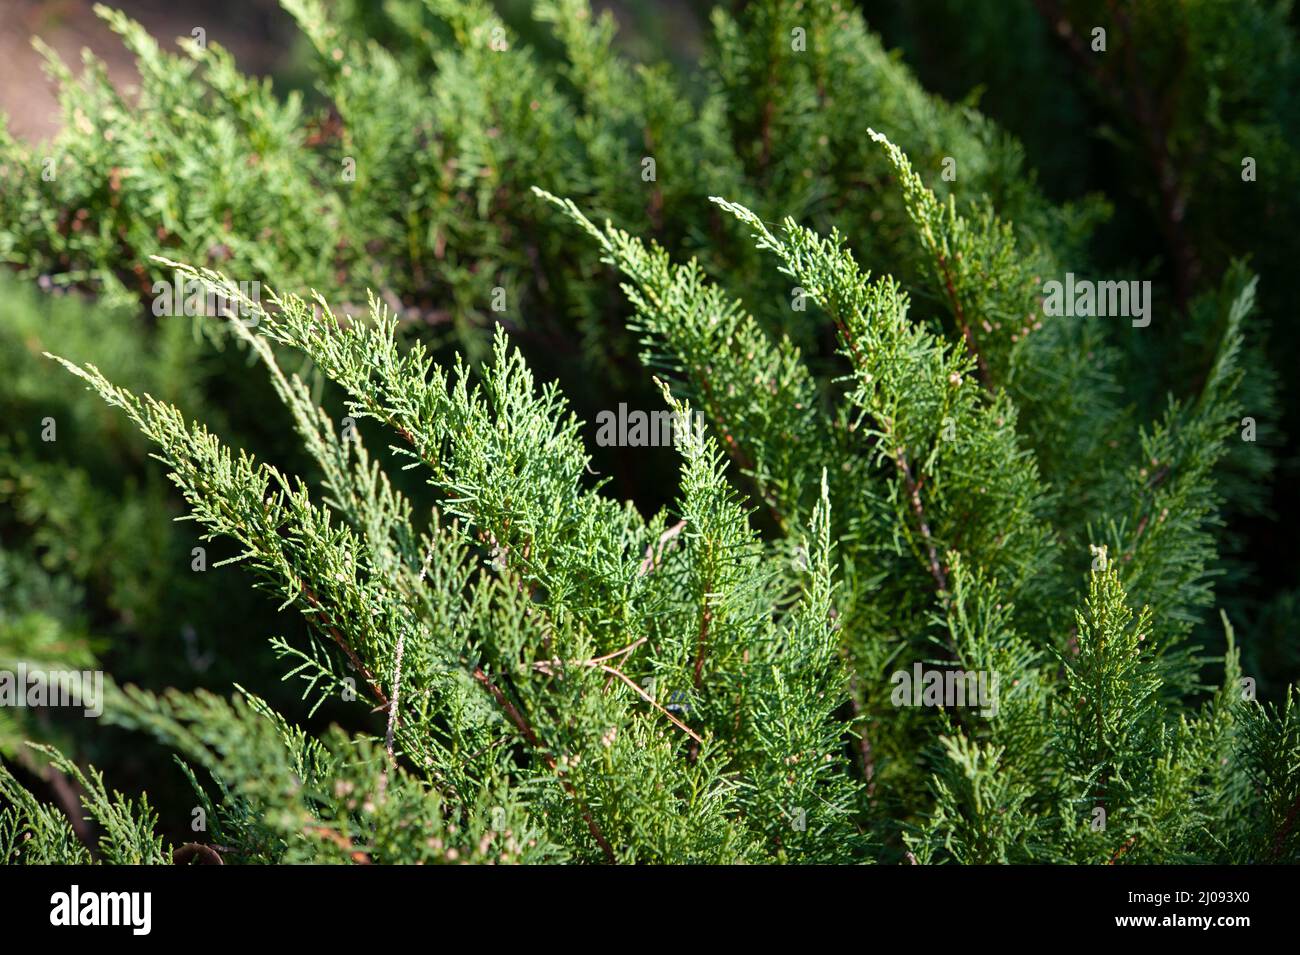 Juniperus sabina, is a species of small tree or shrub in the cypress family Cupressaceae.. Stock Photo